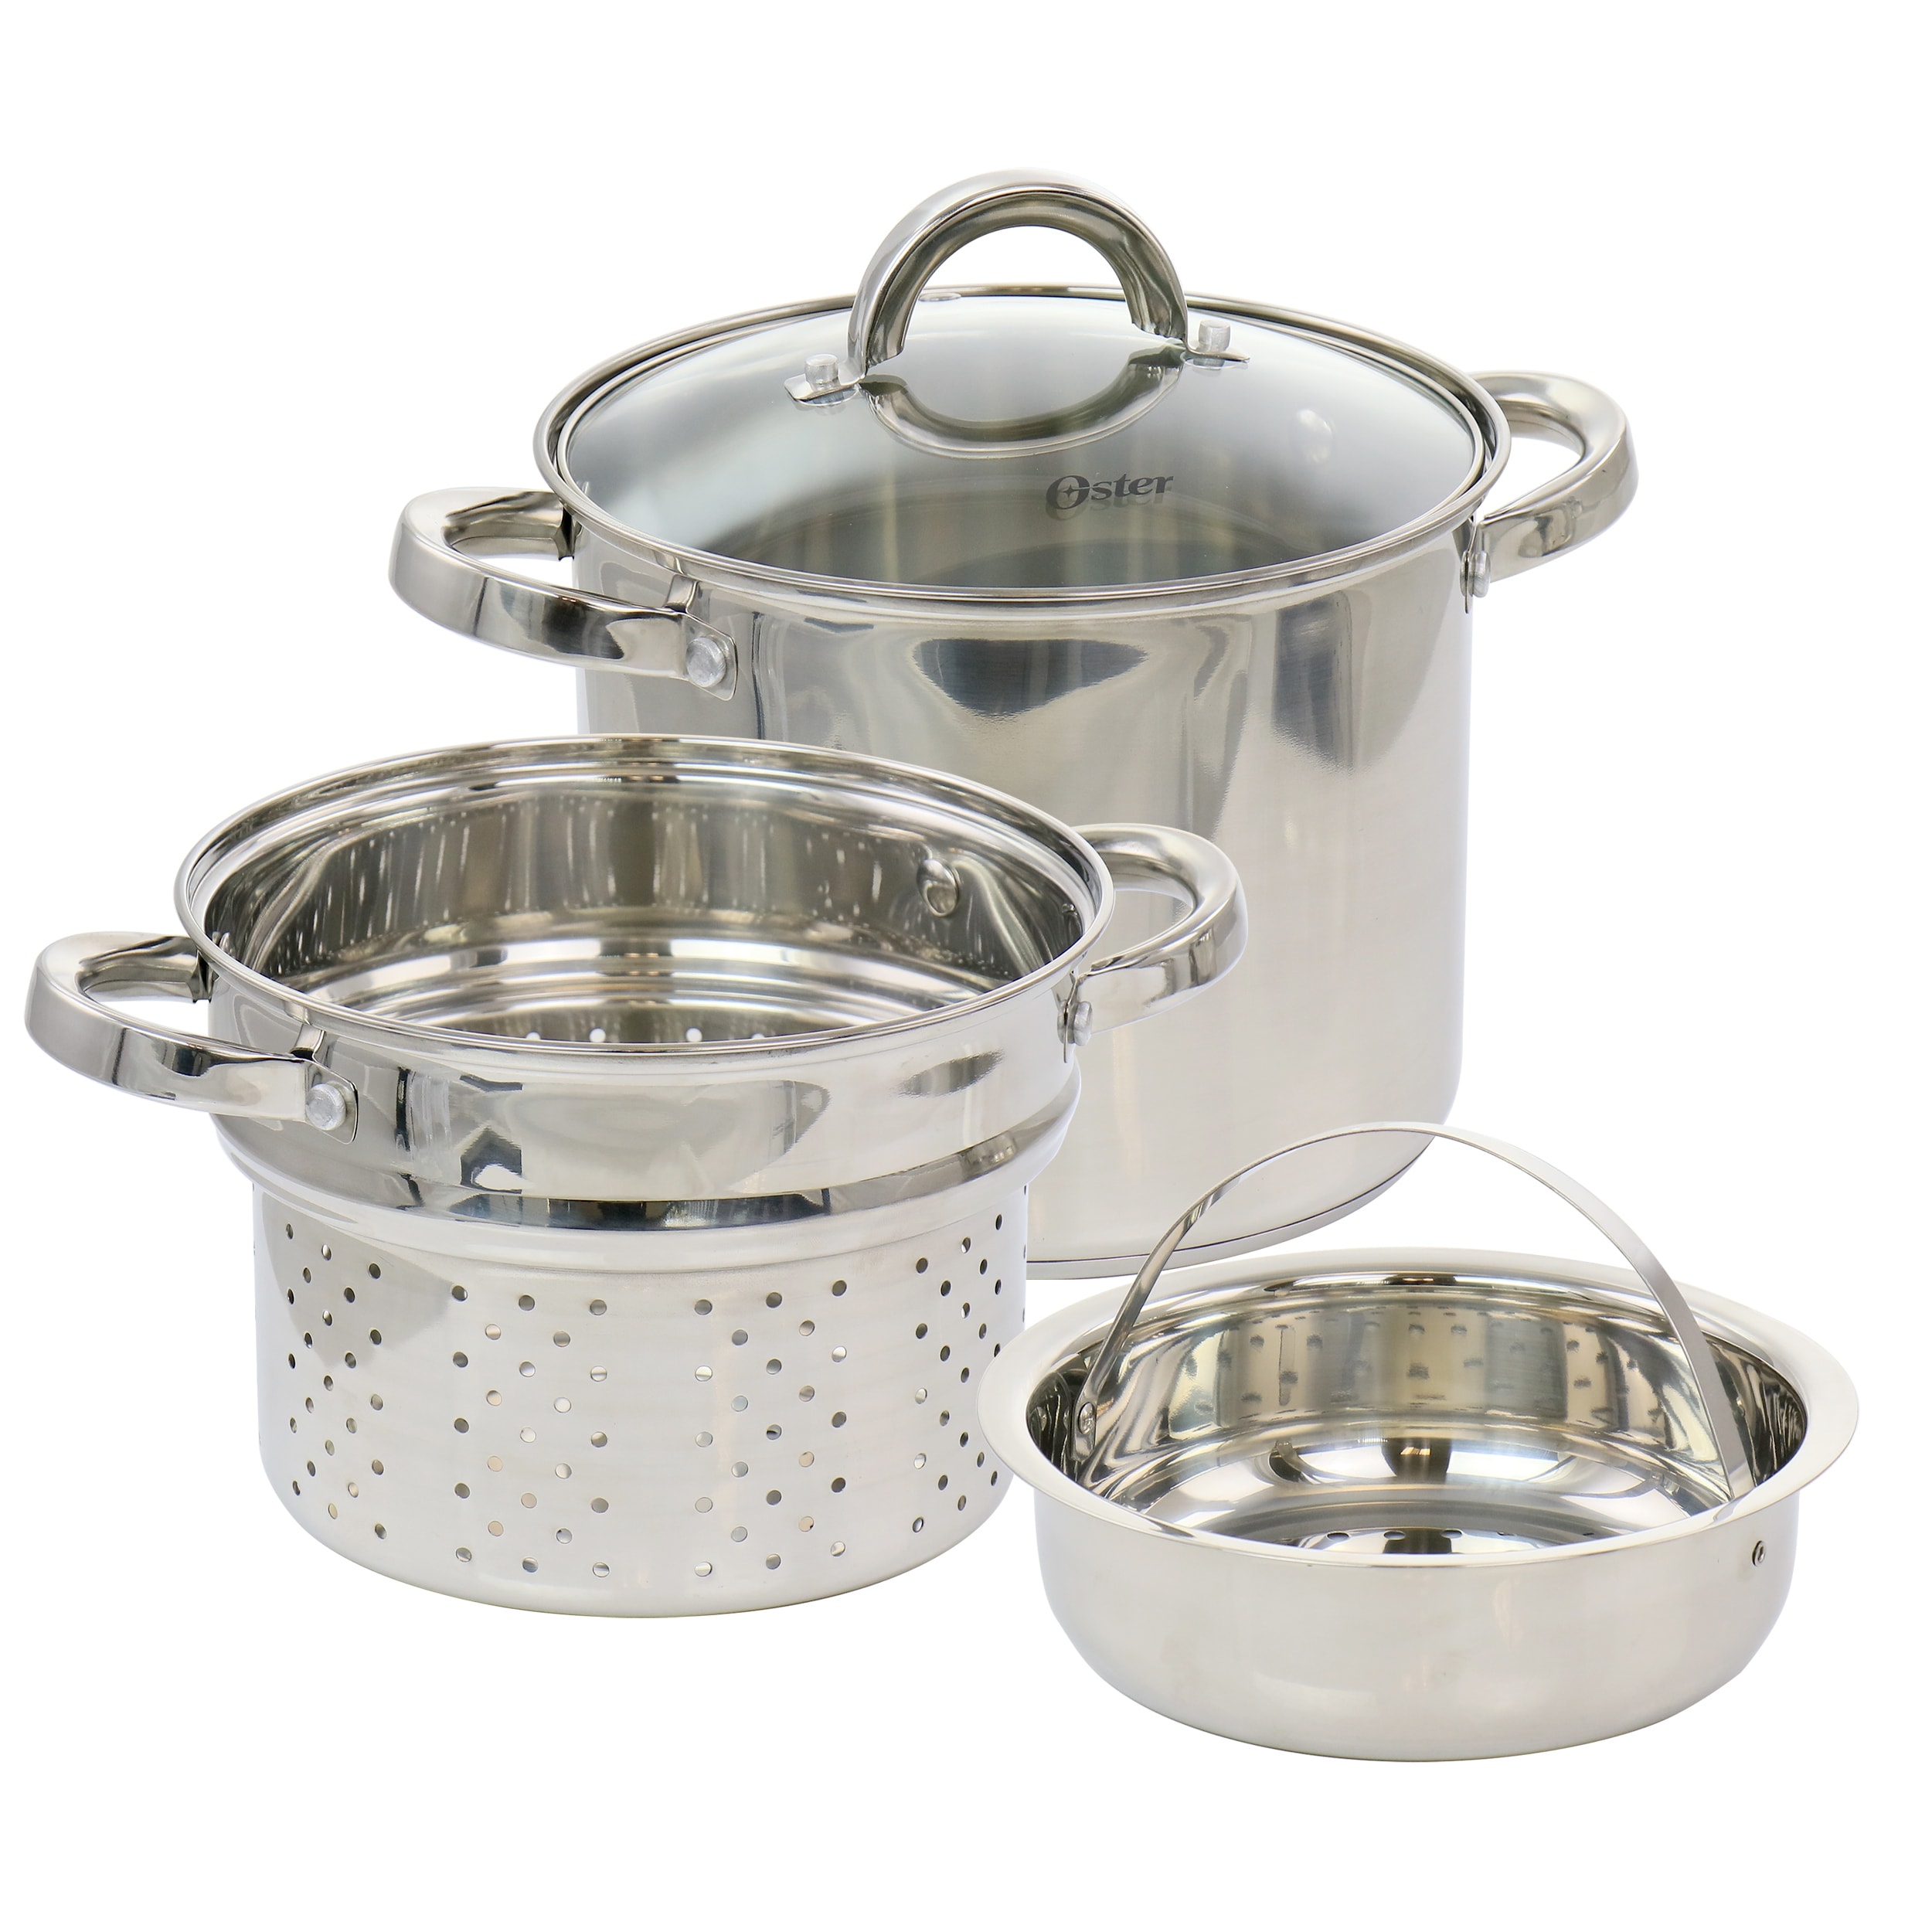 https://ak1.ostkcdn.com/images/products/is/images/direct/60cb3e26882a225d53882f85d427bbfc63fef29d/Oster-Sangerfield-4-Piece-5-Quart-Stainless-Steel-Pasta-Pot-with-Lid.jpg